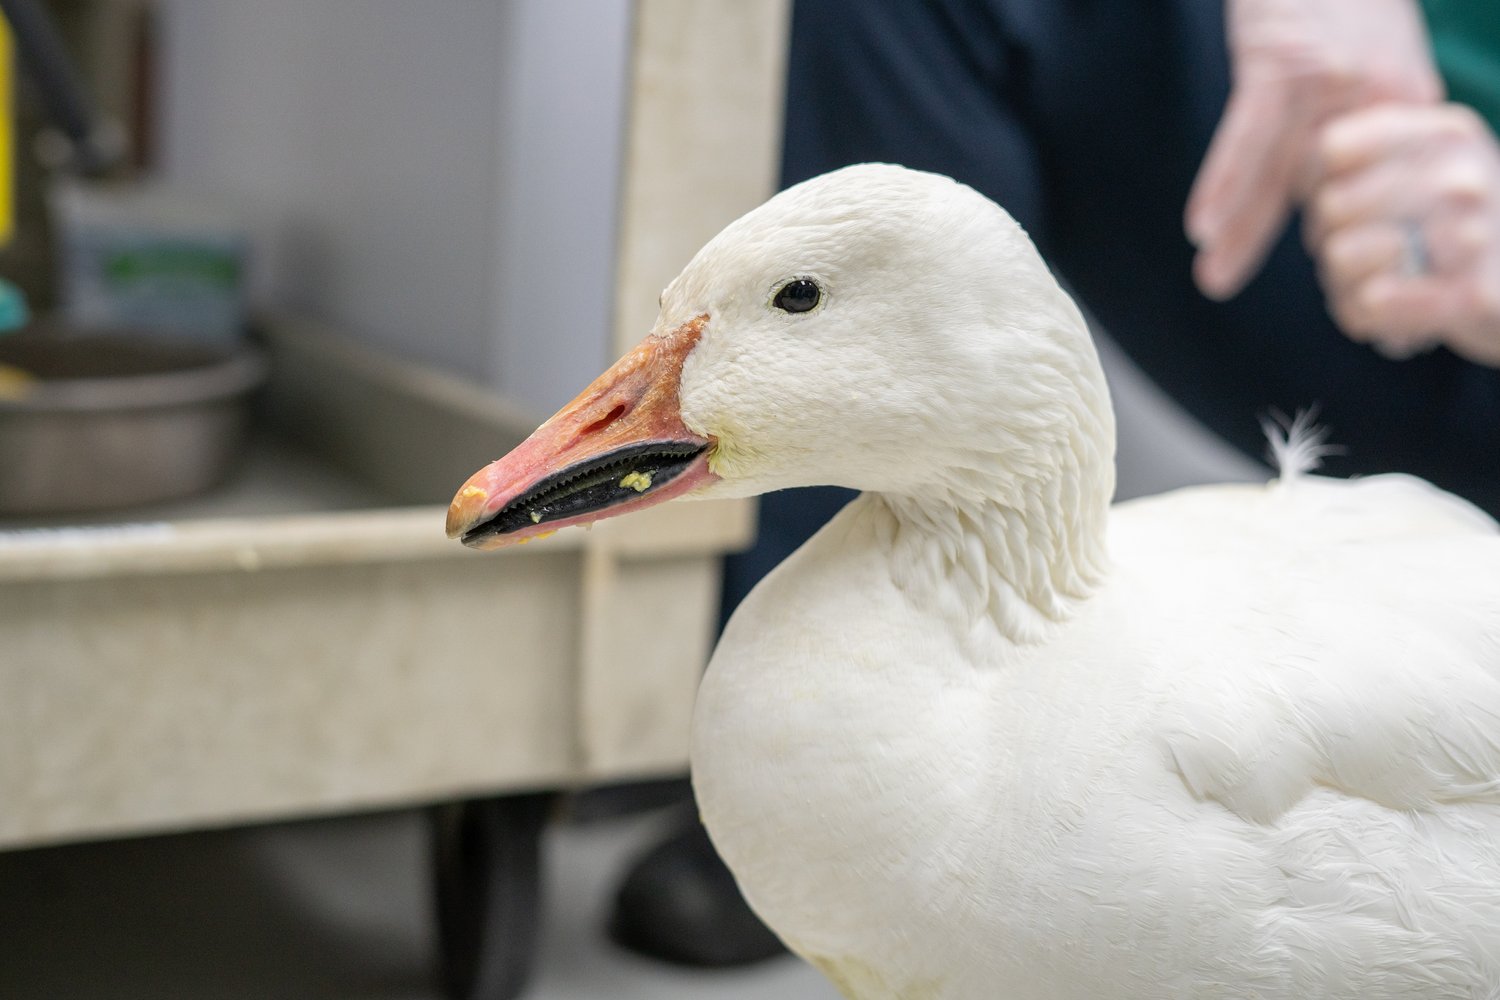 Snow goose treated for lead toxicity at Cornell Veterinary Medicine